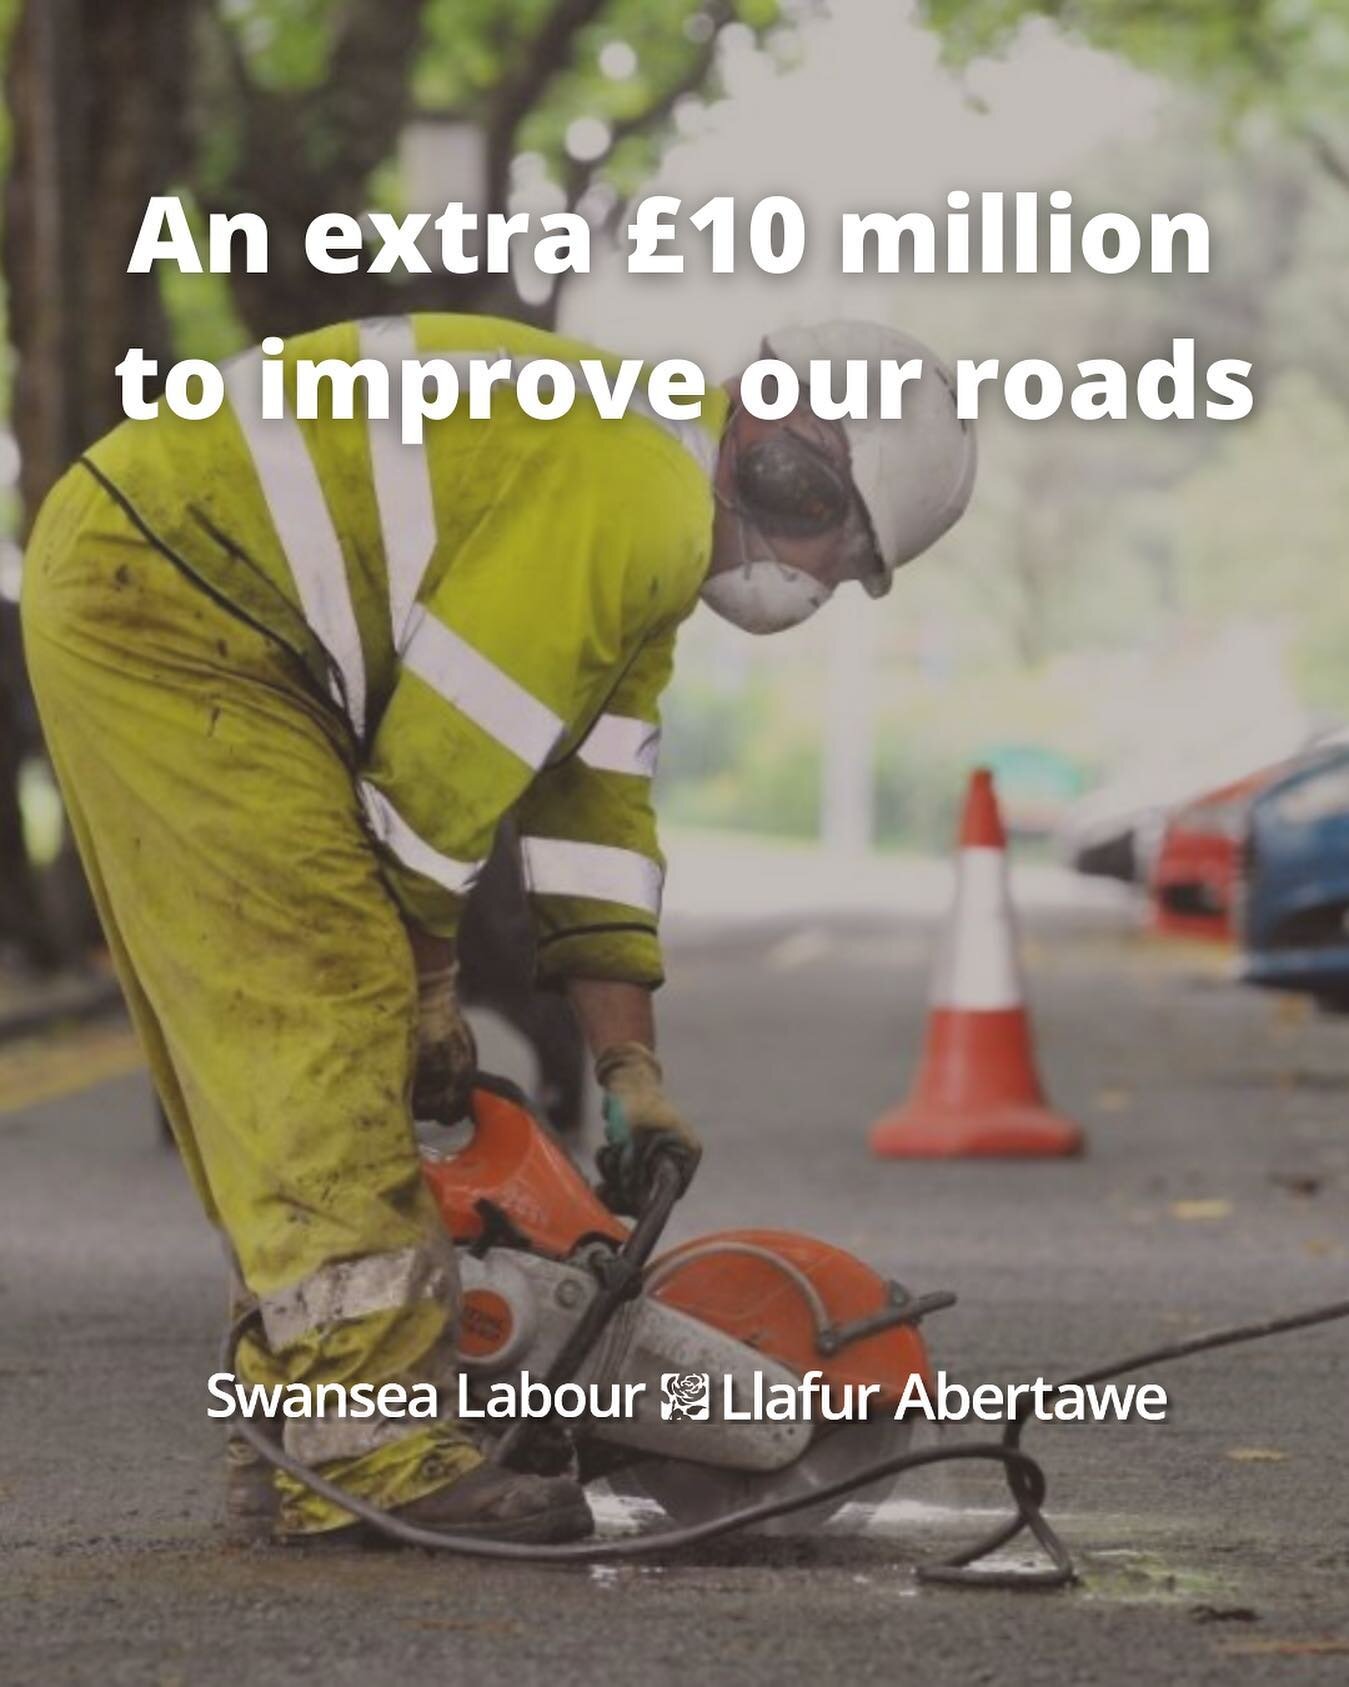 🚲🏍️🚛🚗🛣️ Better Streets 🛣️🚗🚛🏍️🚲

Here are our key manifesto pledges for better roads, streets, pavements and active travel.

✅ IMMEDIATELY ALLOCATE &pound;10M INTO ROAD IMPROVEMENT

✅ DOUBLE THE SIZE OF OUR ROAD REPAIR TEAMS

✅ 48HR POTHOLE 